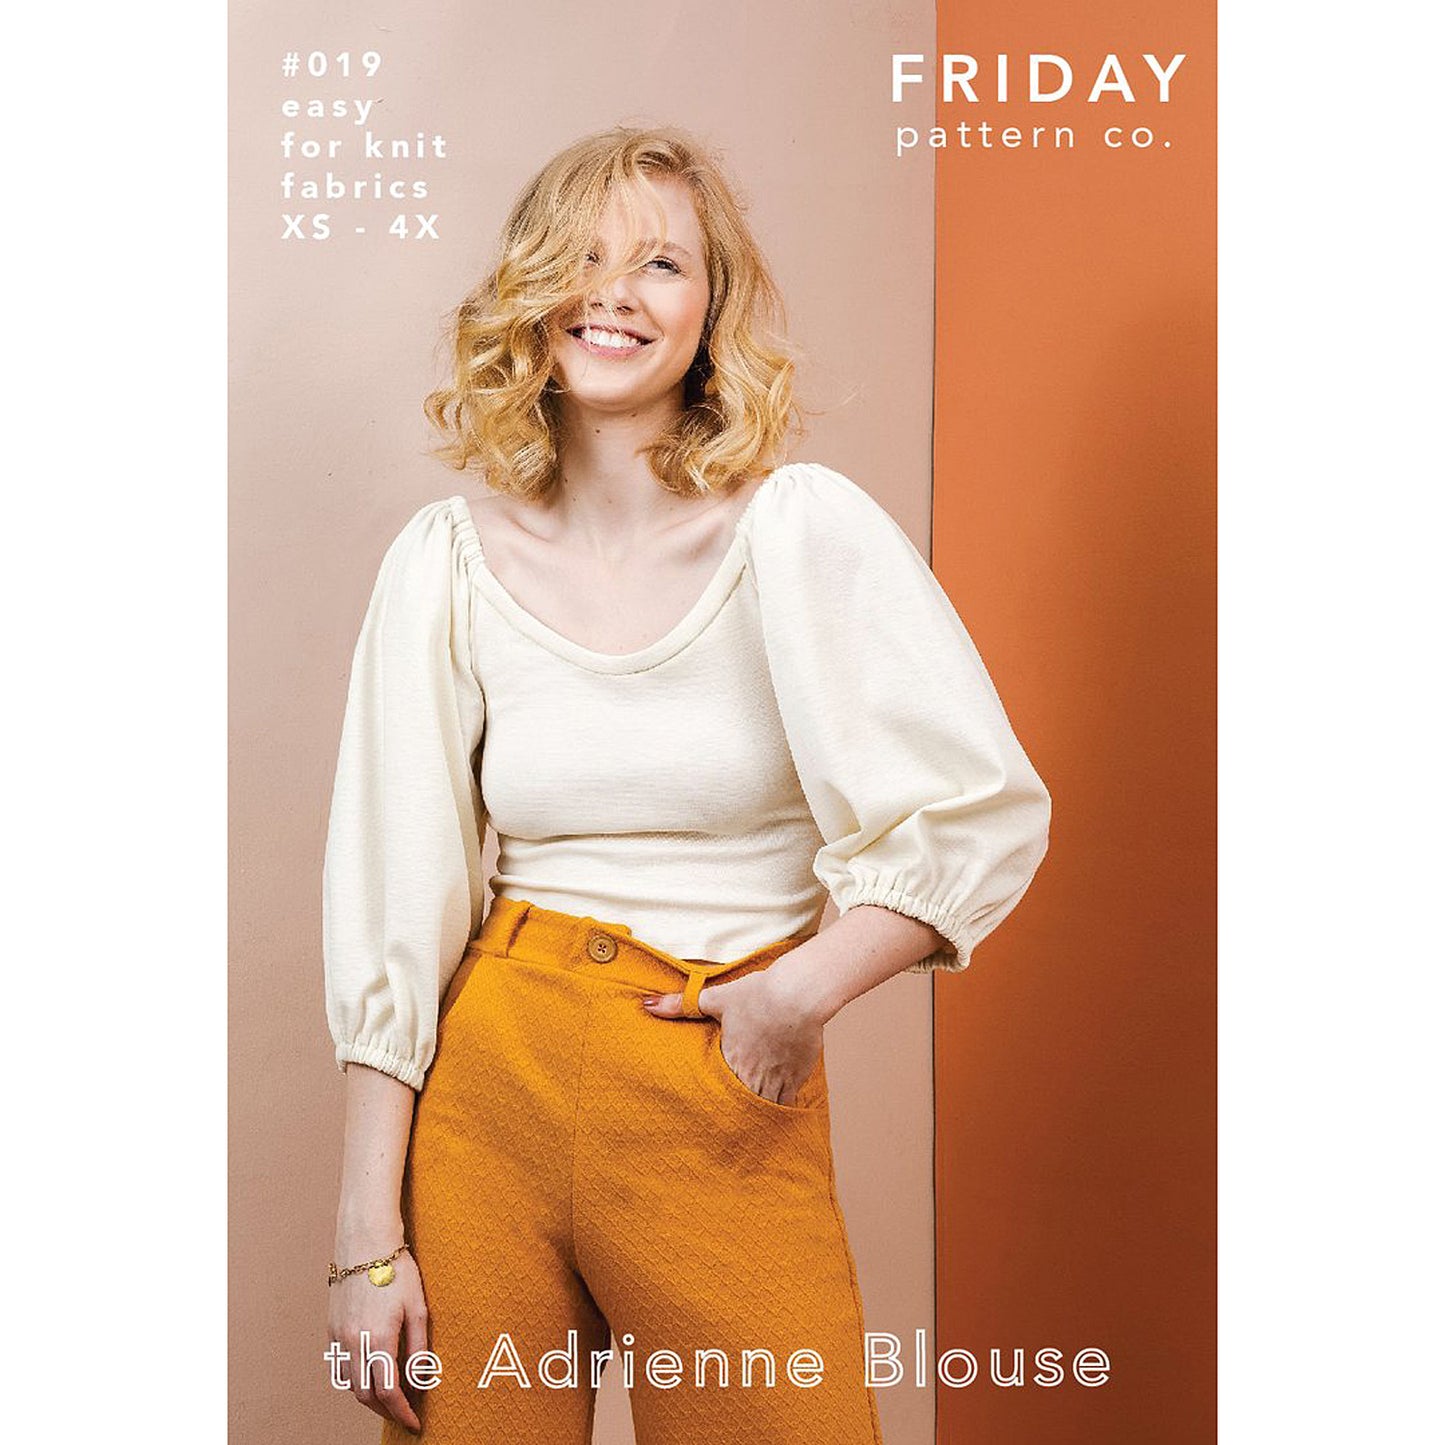 Adrienne Blouse Sewing Pattern - Friday Pattern Company